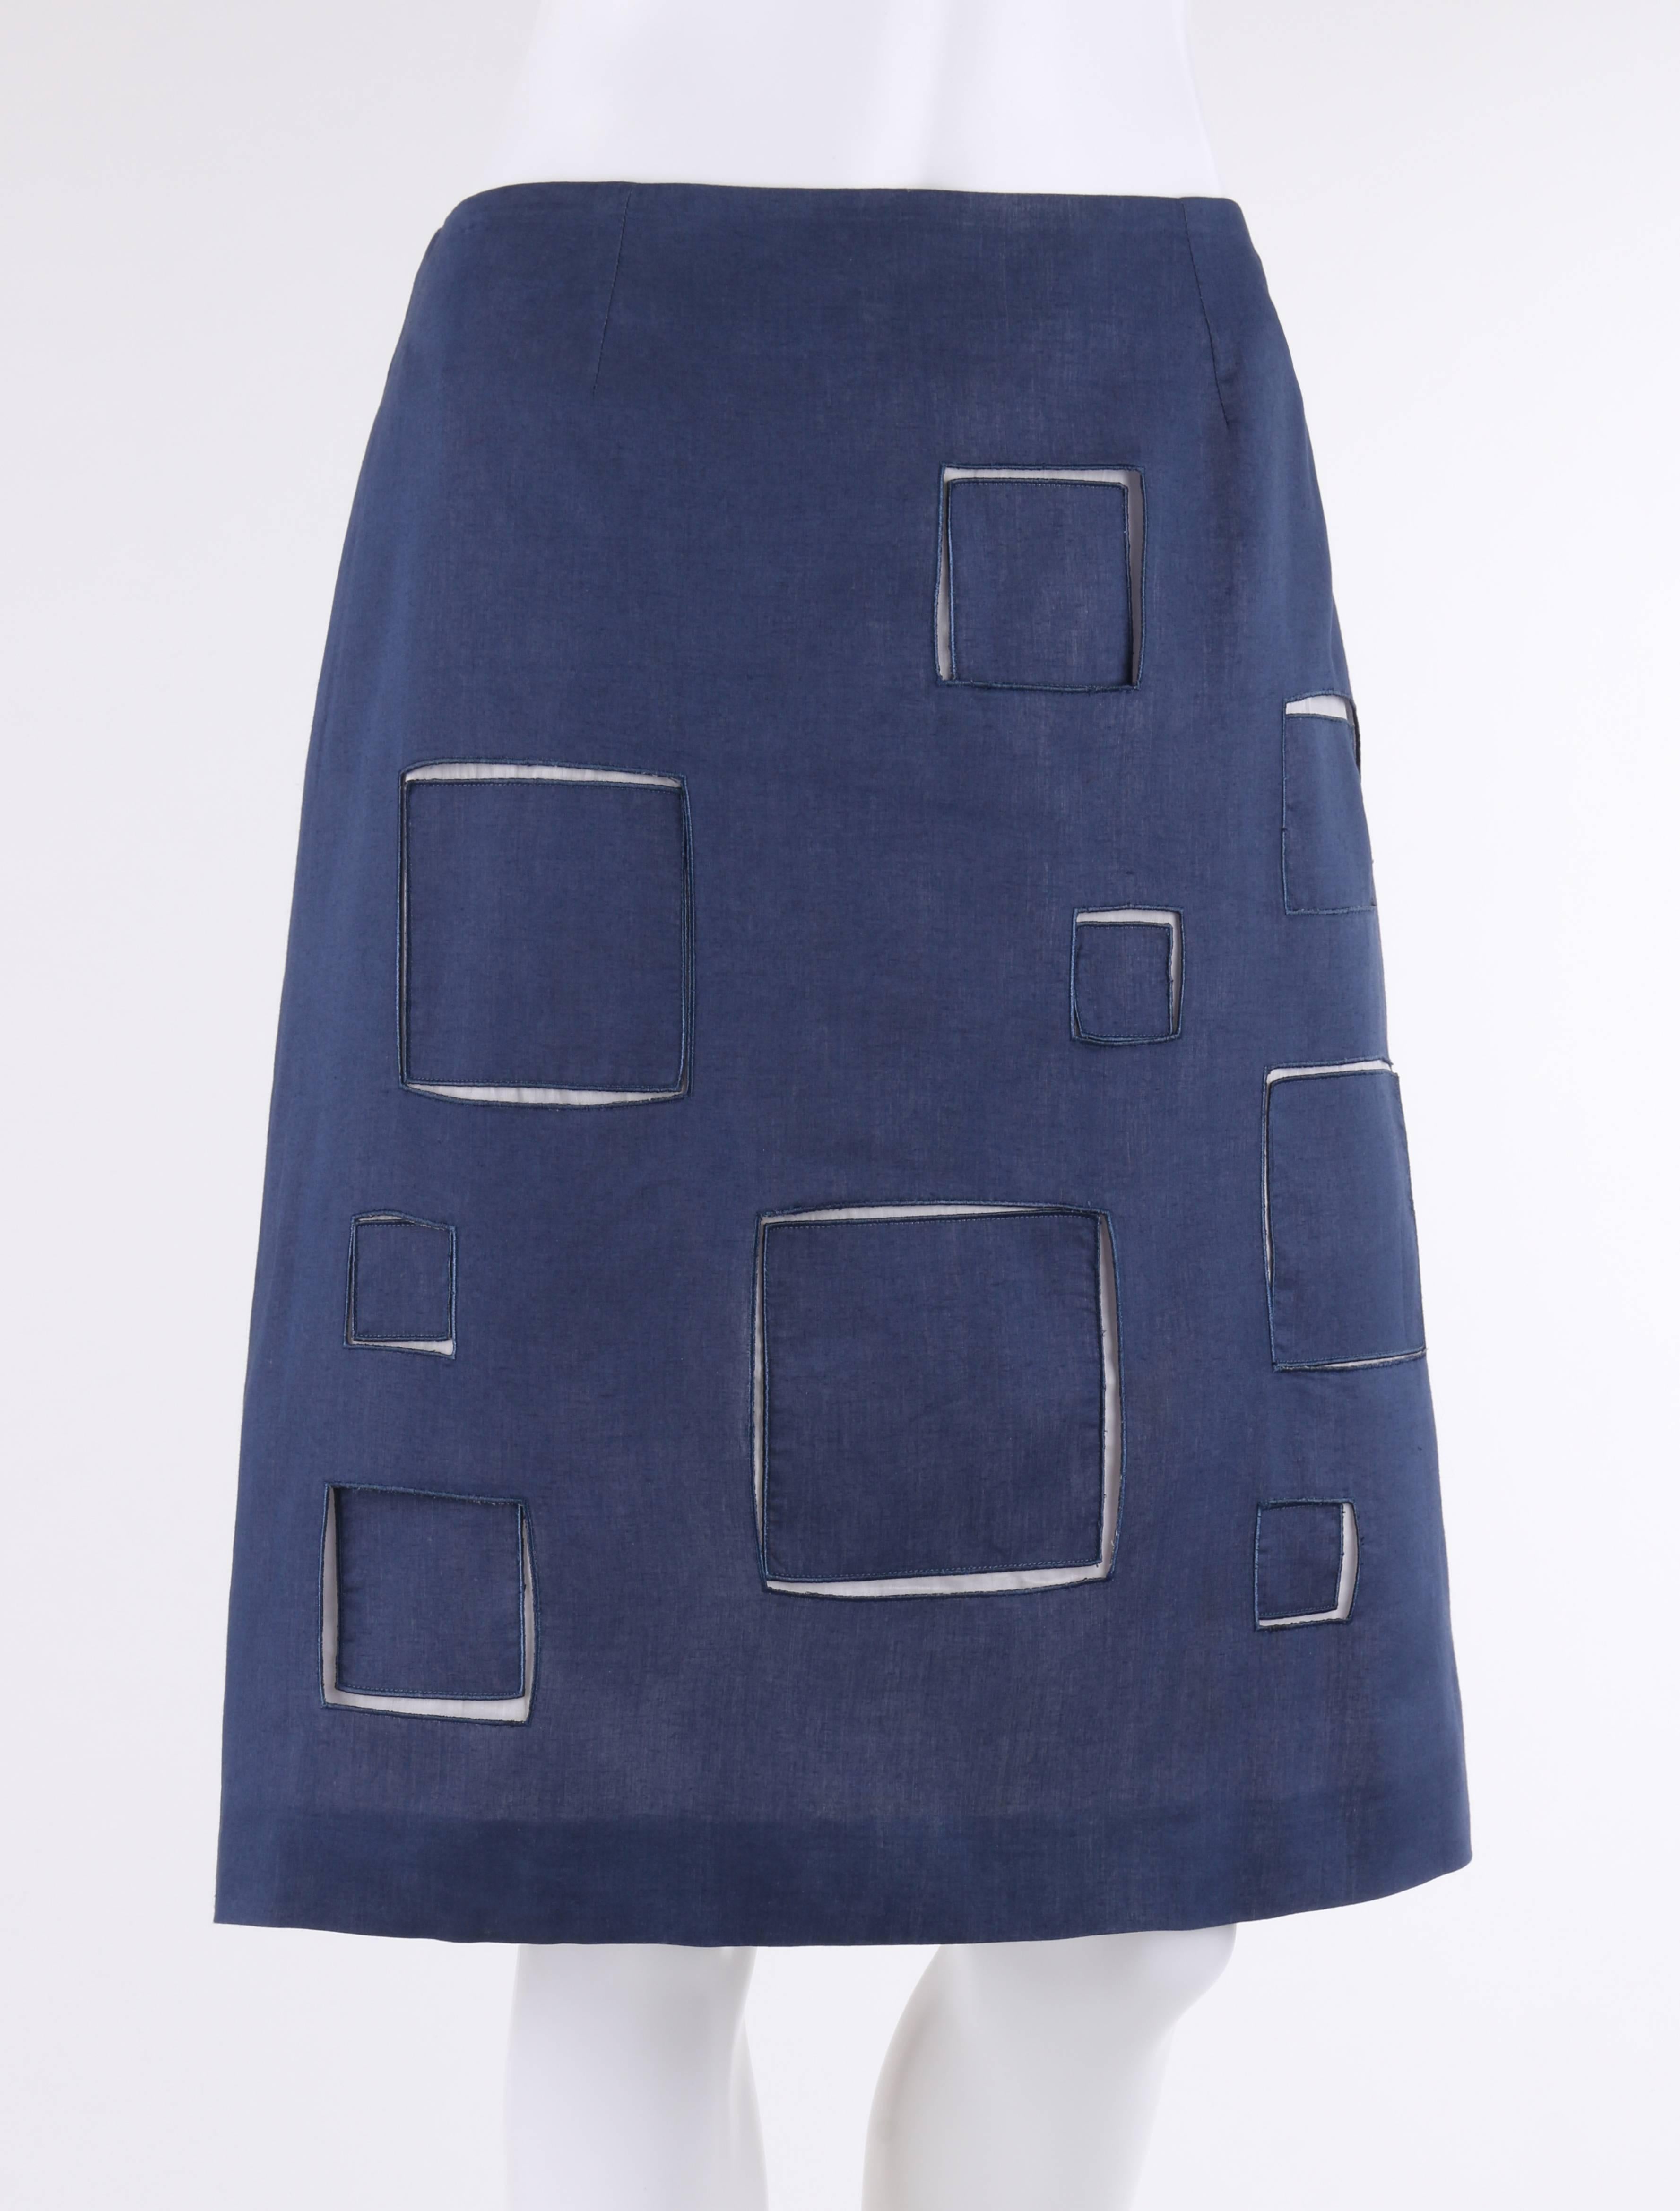 Givenchy Couture Autumn/Winter 1998 blue cotton square cut work skirt designed by Alexander McQueen. Blue cotton overlay with varying sized cut out squares. White cotton under layer with square appliques. Side seam invisible zipper with hook and eye